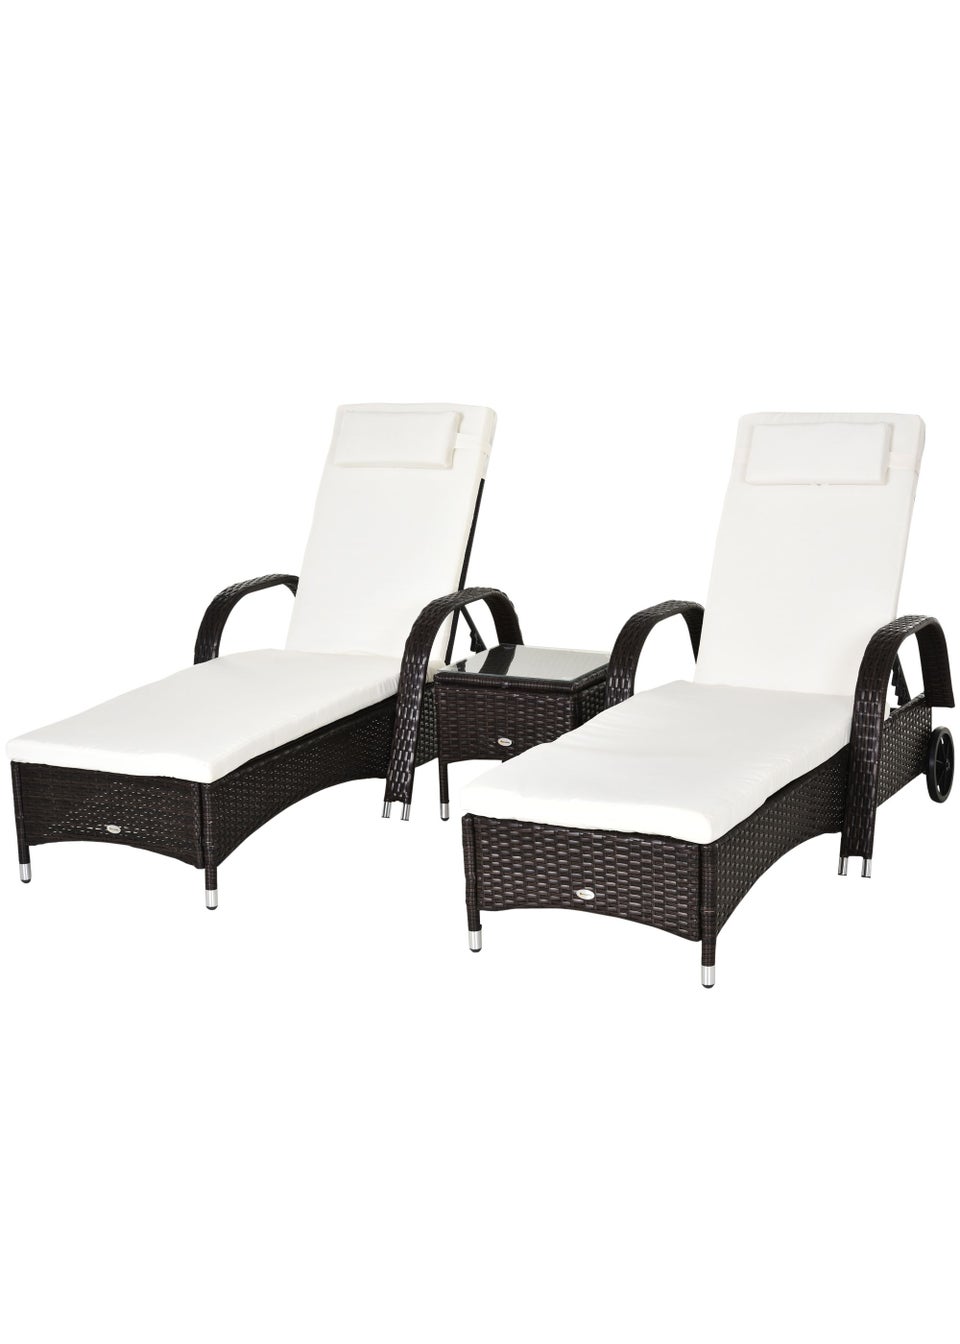 Outsunny 3 Pieces PE Rattan Patio Lounge Chair Set, Outdoor Recliner Lounge Chairs with Wheels for Outside with Cushions